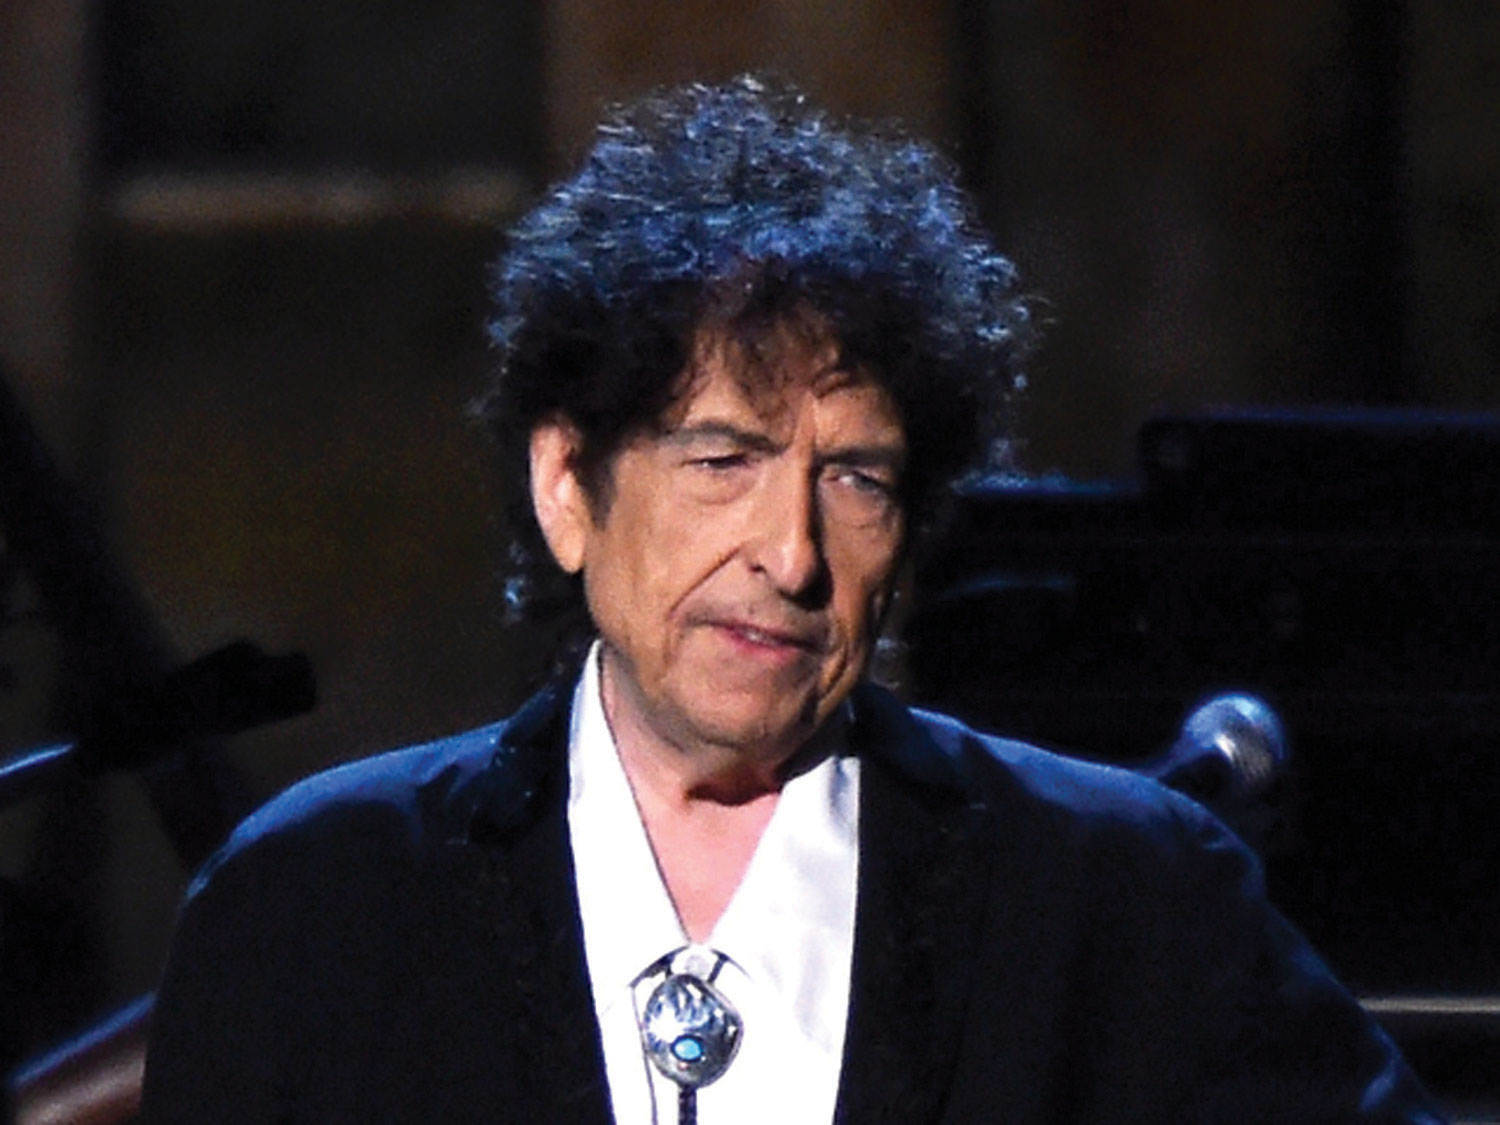 Bob Dylan played to a sold out audience at Red Rocks Colorado on Father’s Day. Next Thursday, he will play to a sold out audience at Artpark. It will be without question the most important June 30 show to take place on the Niagara Frontier.